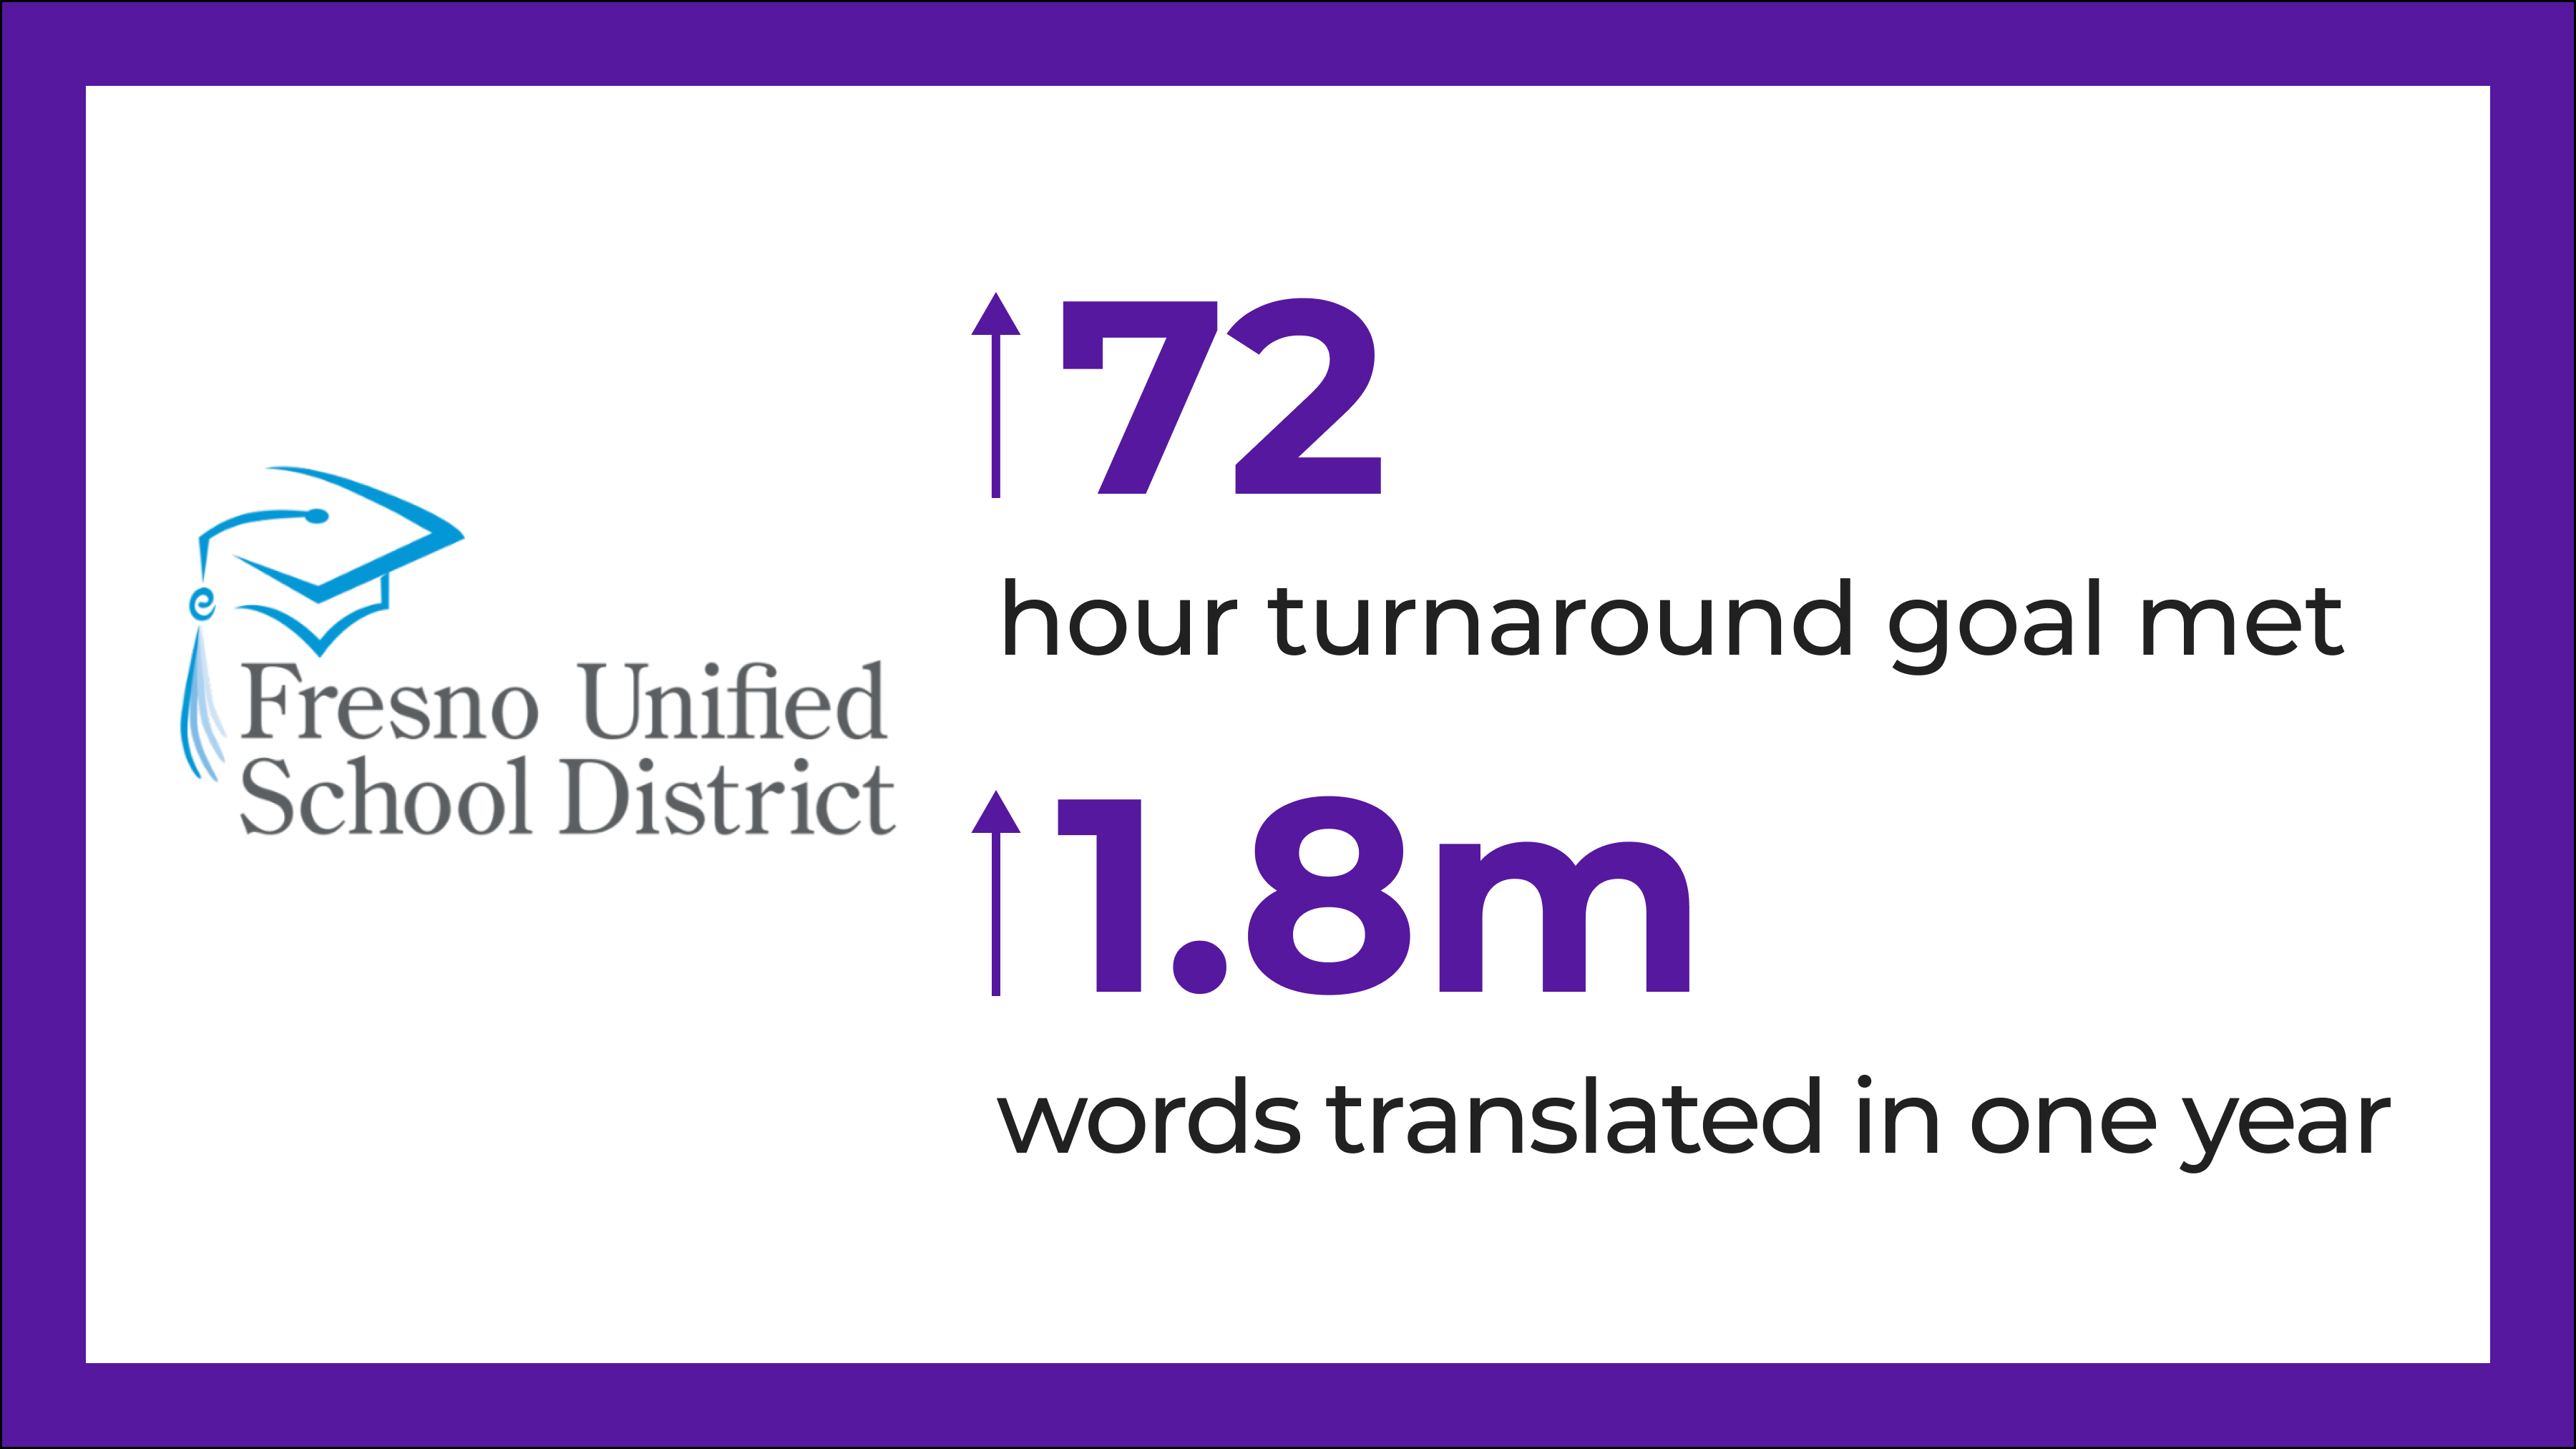 How Fresno Unified School District worked with Smartling to increase efficiency of their translation process to deliver localized materials to students and their families faster.
